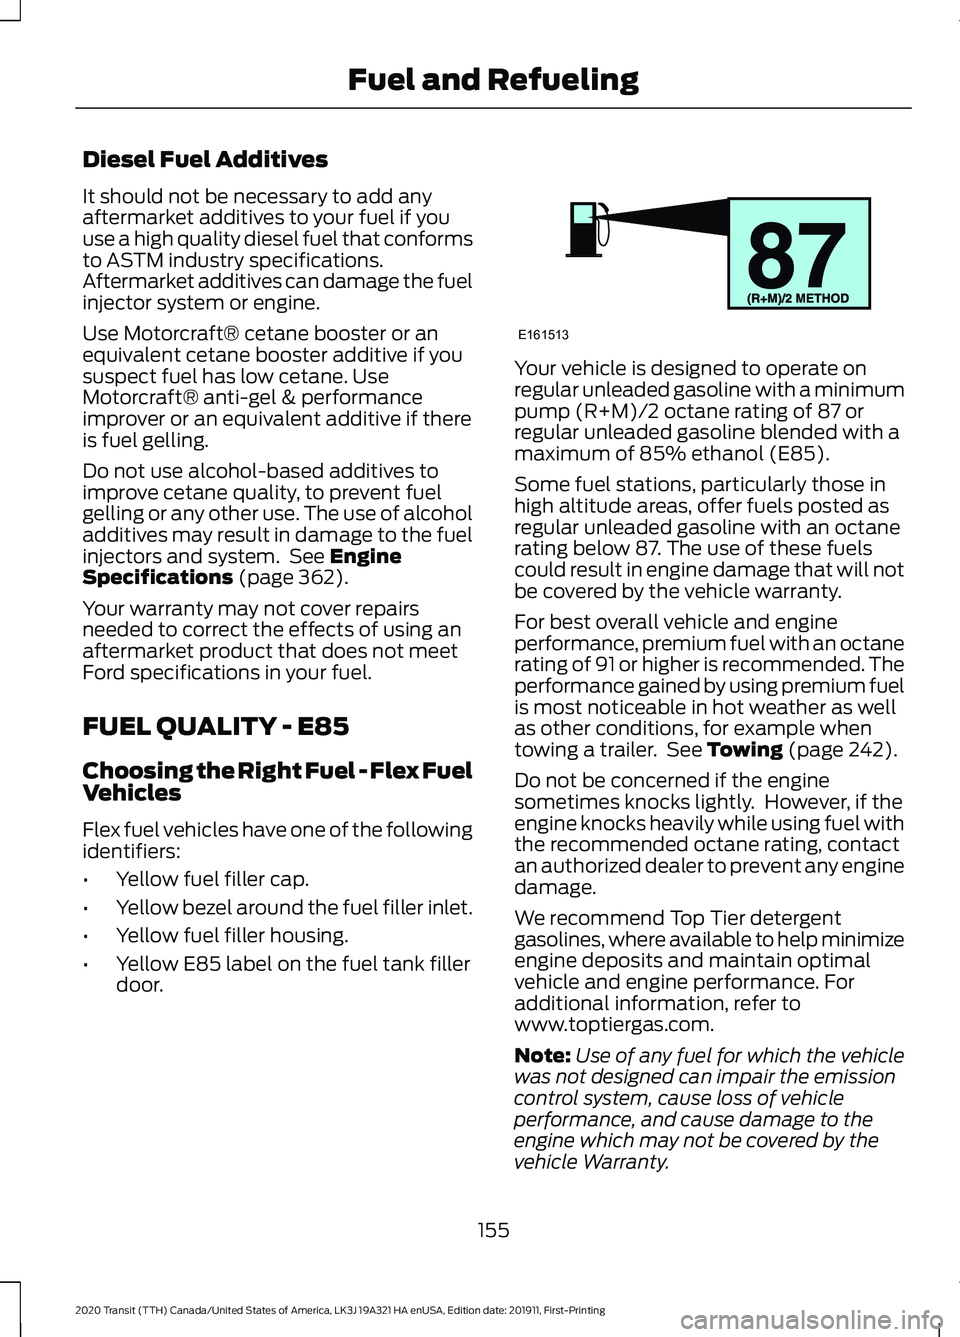 FORD TRANSIT 2020  Owners Manual Diesel Fuel Additives
It should not be necessary to add any
aftermarket additives to your fuel if you
use a high quality diesel fuel that conforms
to ASTM industry specifications.
Aftermarket additive